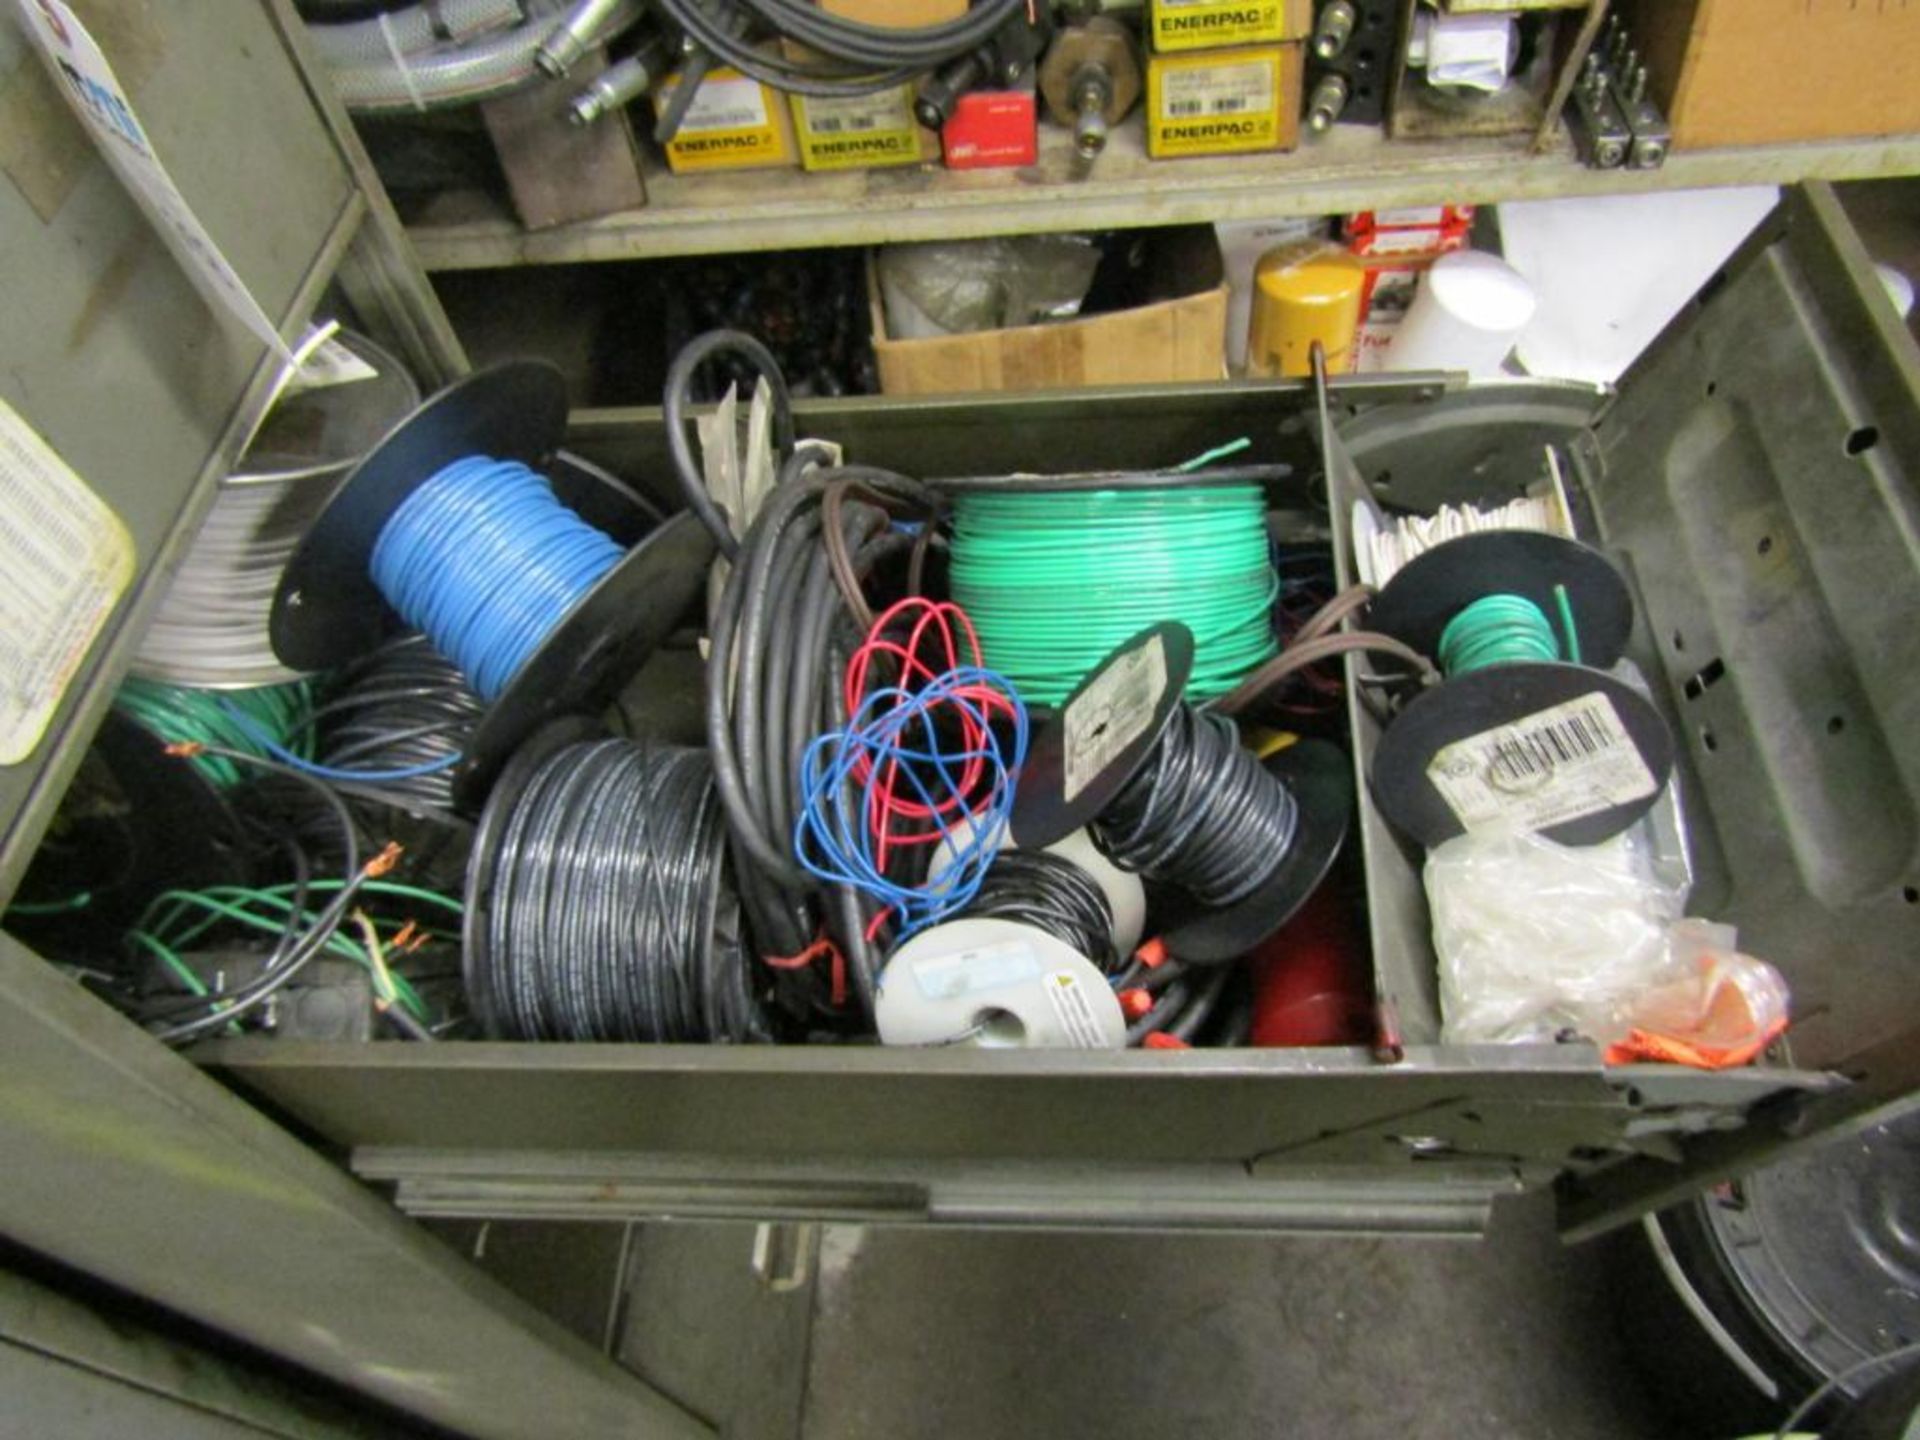 5-Drawer Filing Cabinet; with Contents of Electrical Supplies, to Include Wire, Switches, Contacts, - Image 3 of 6